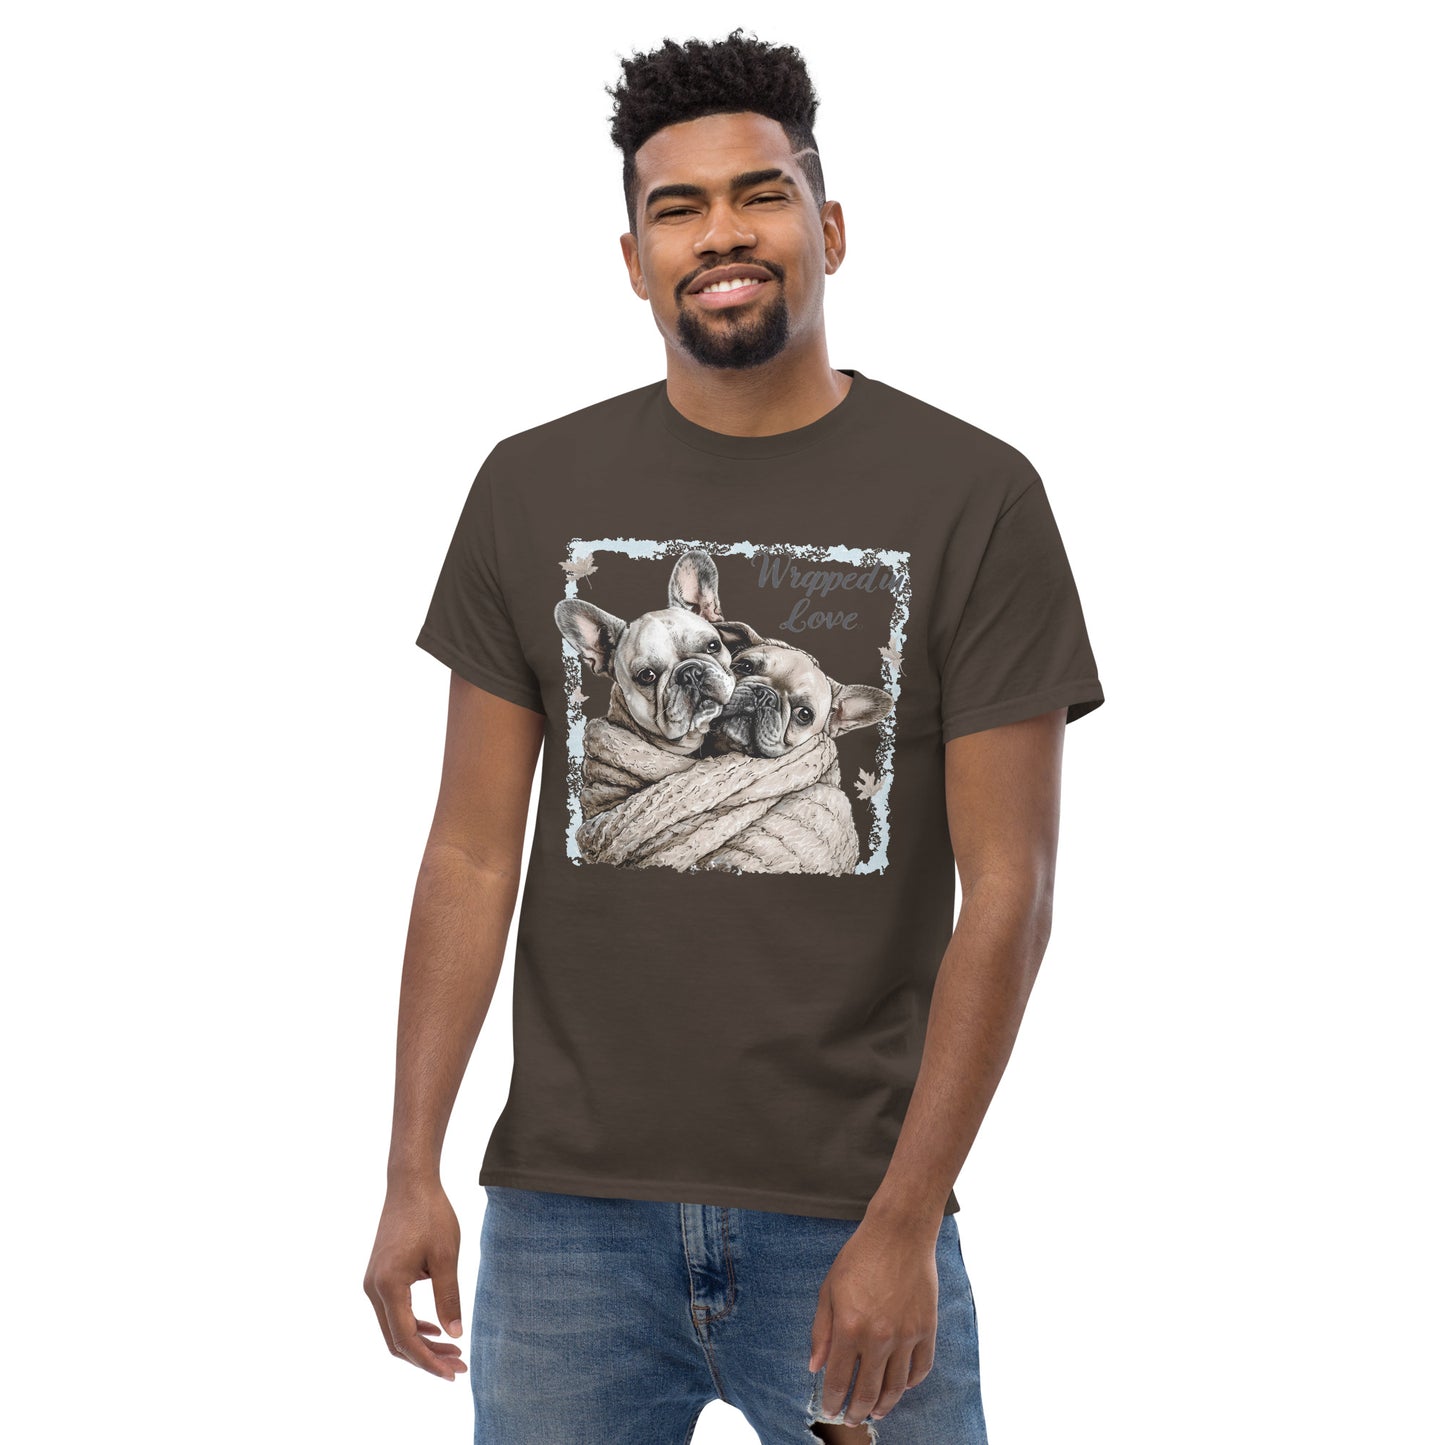 "Wrapped in Love" Unisex T-Shirt